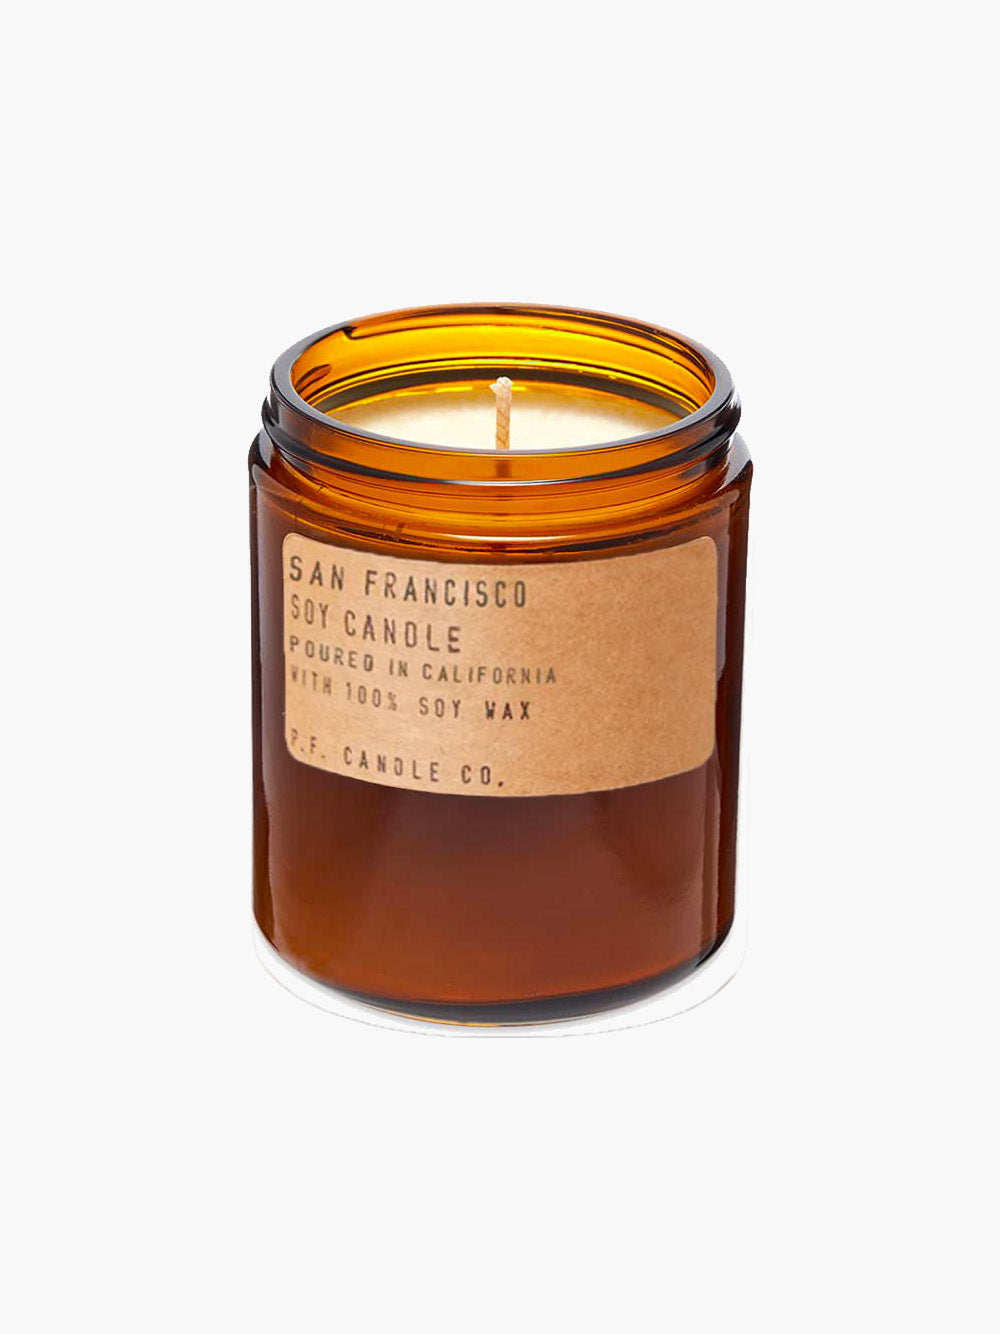 P.F. Candle Co. 204g Soy Candle - San Francisco